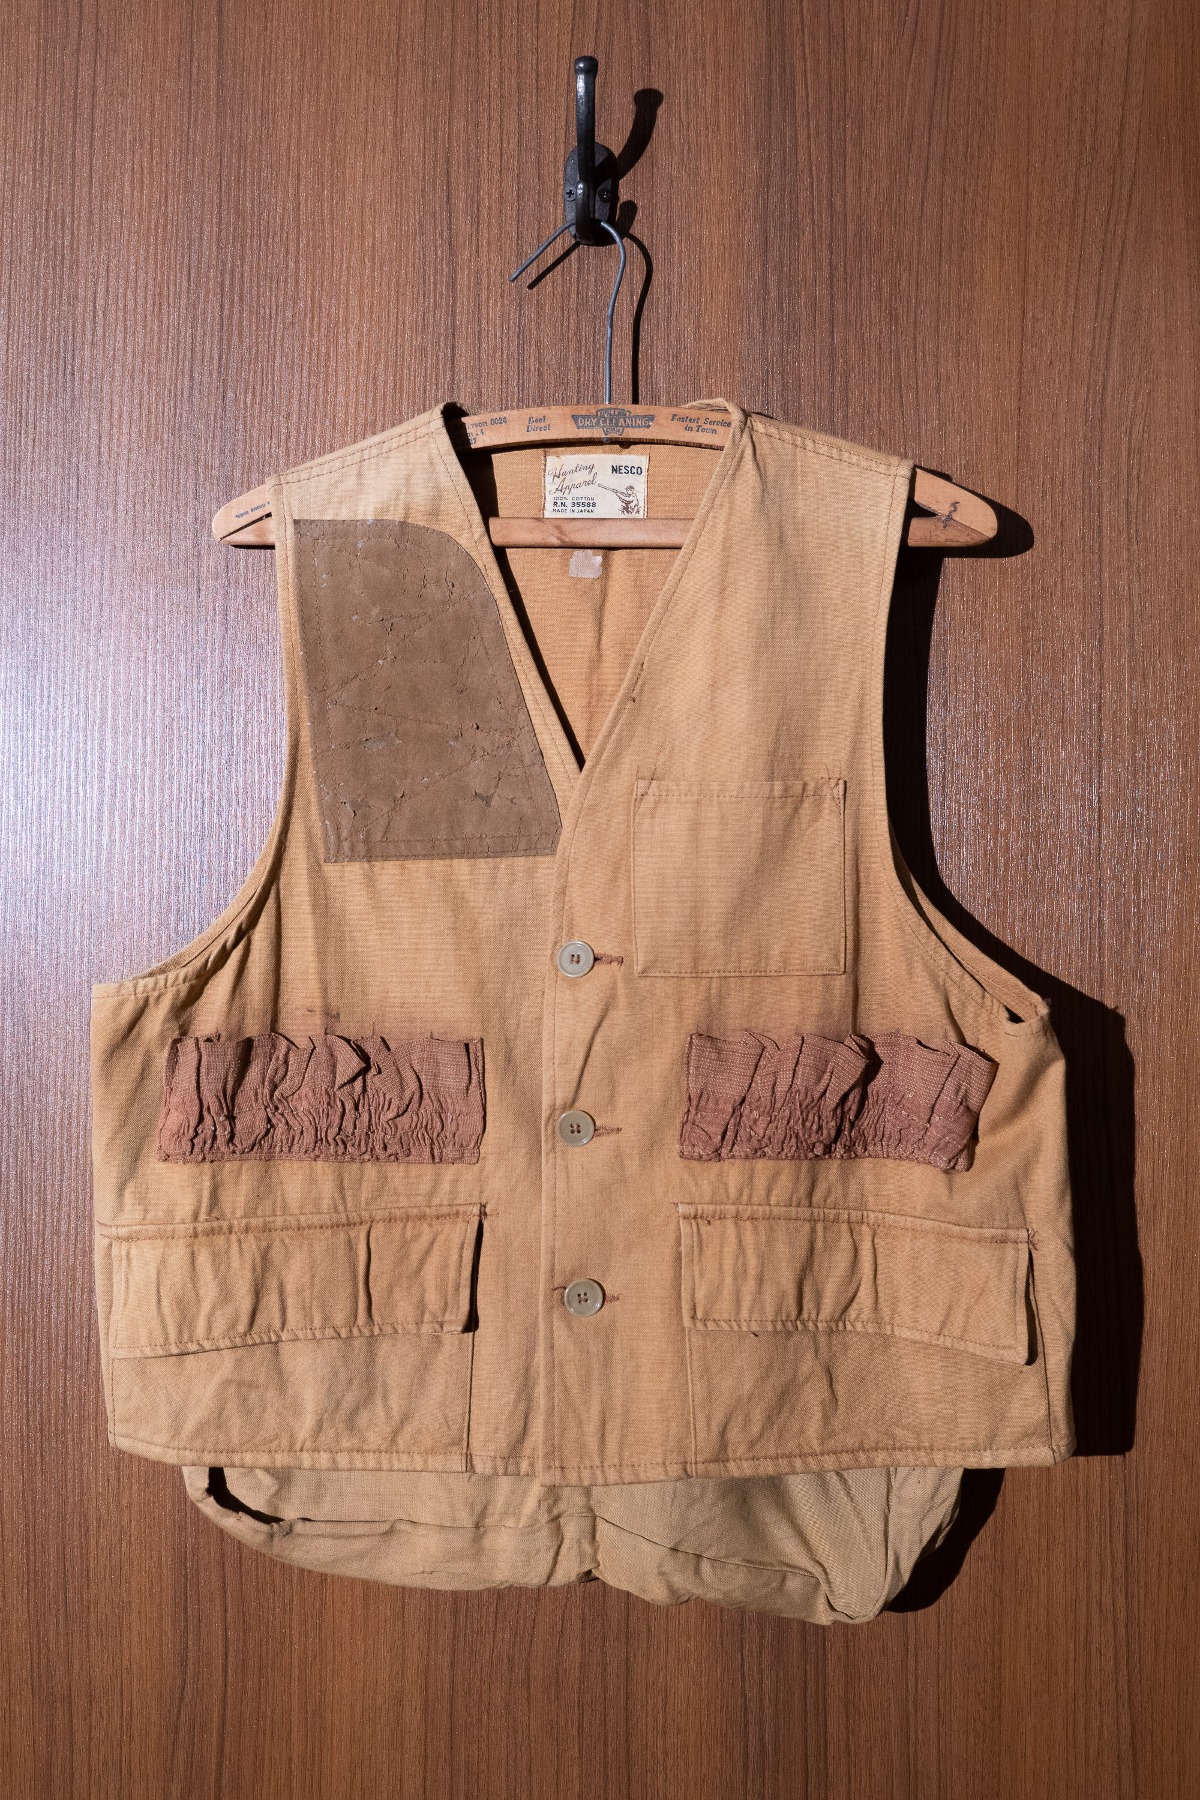 HUNTING VEST (size : unknown)